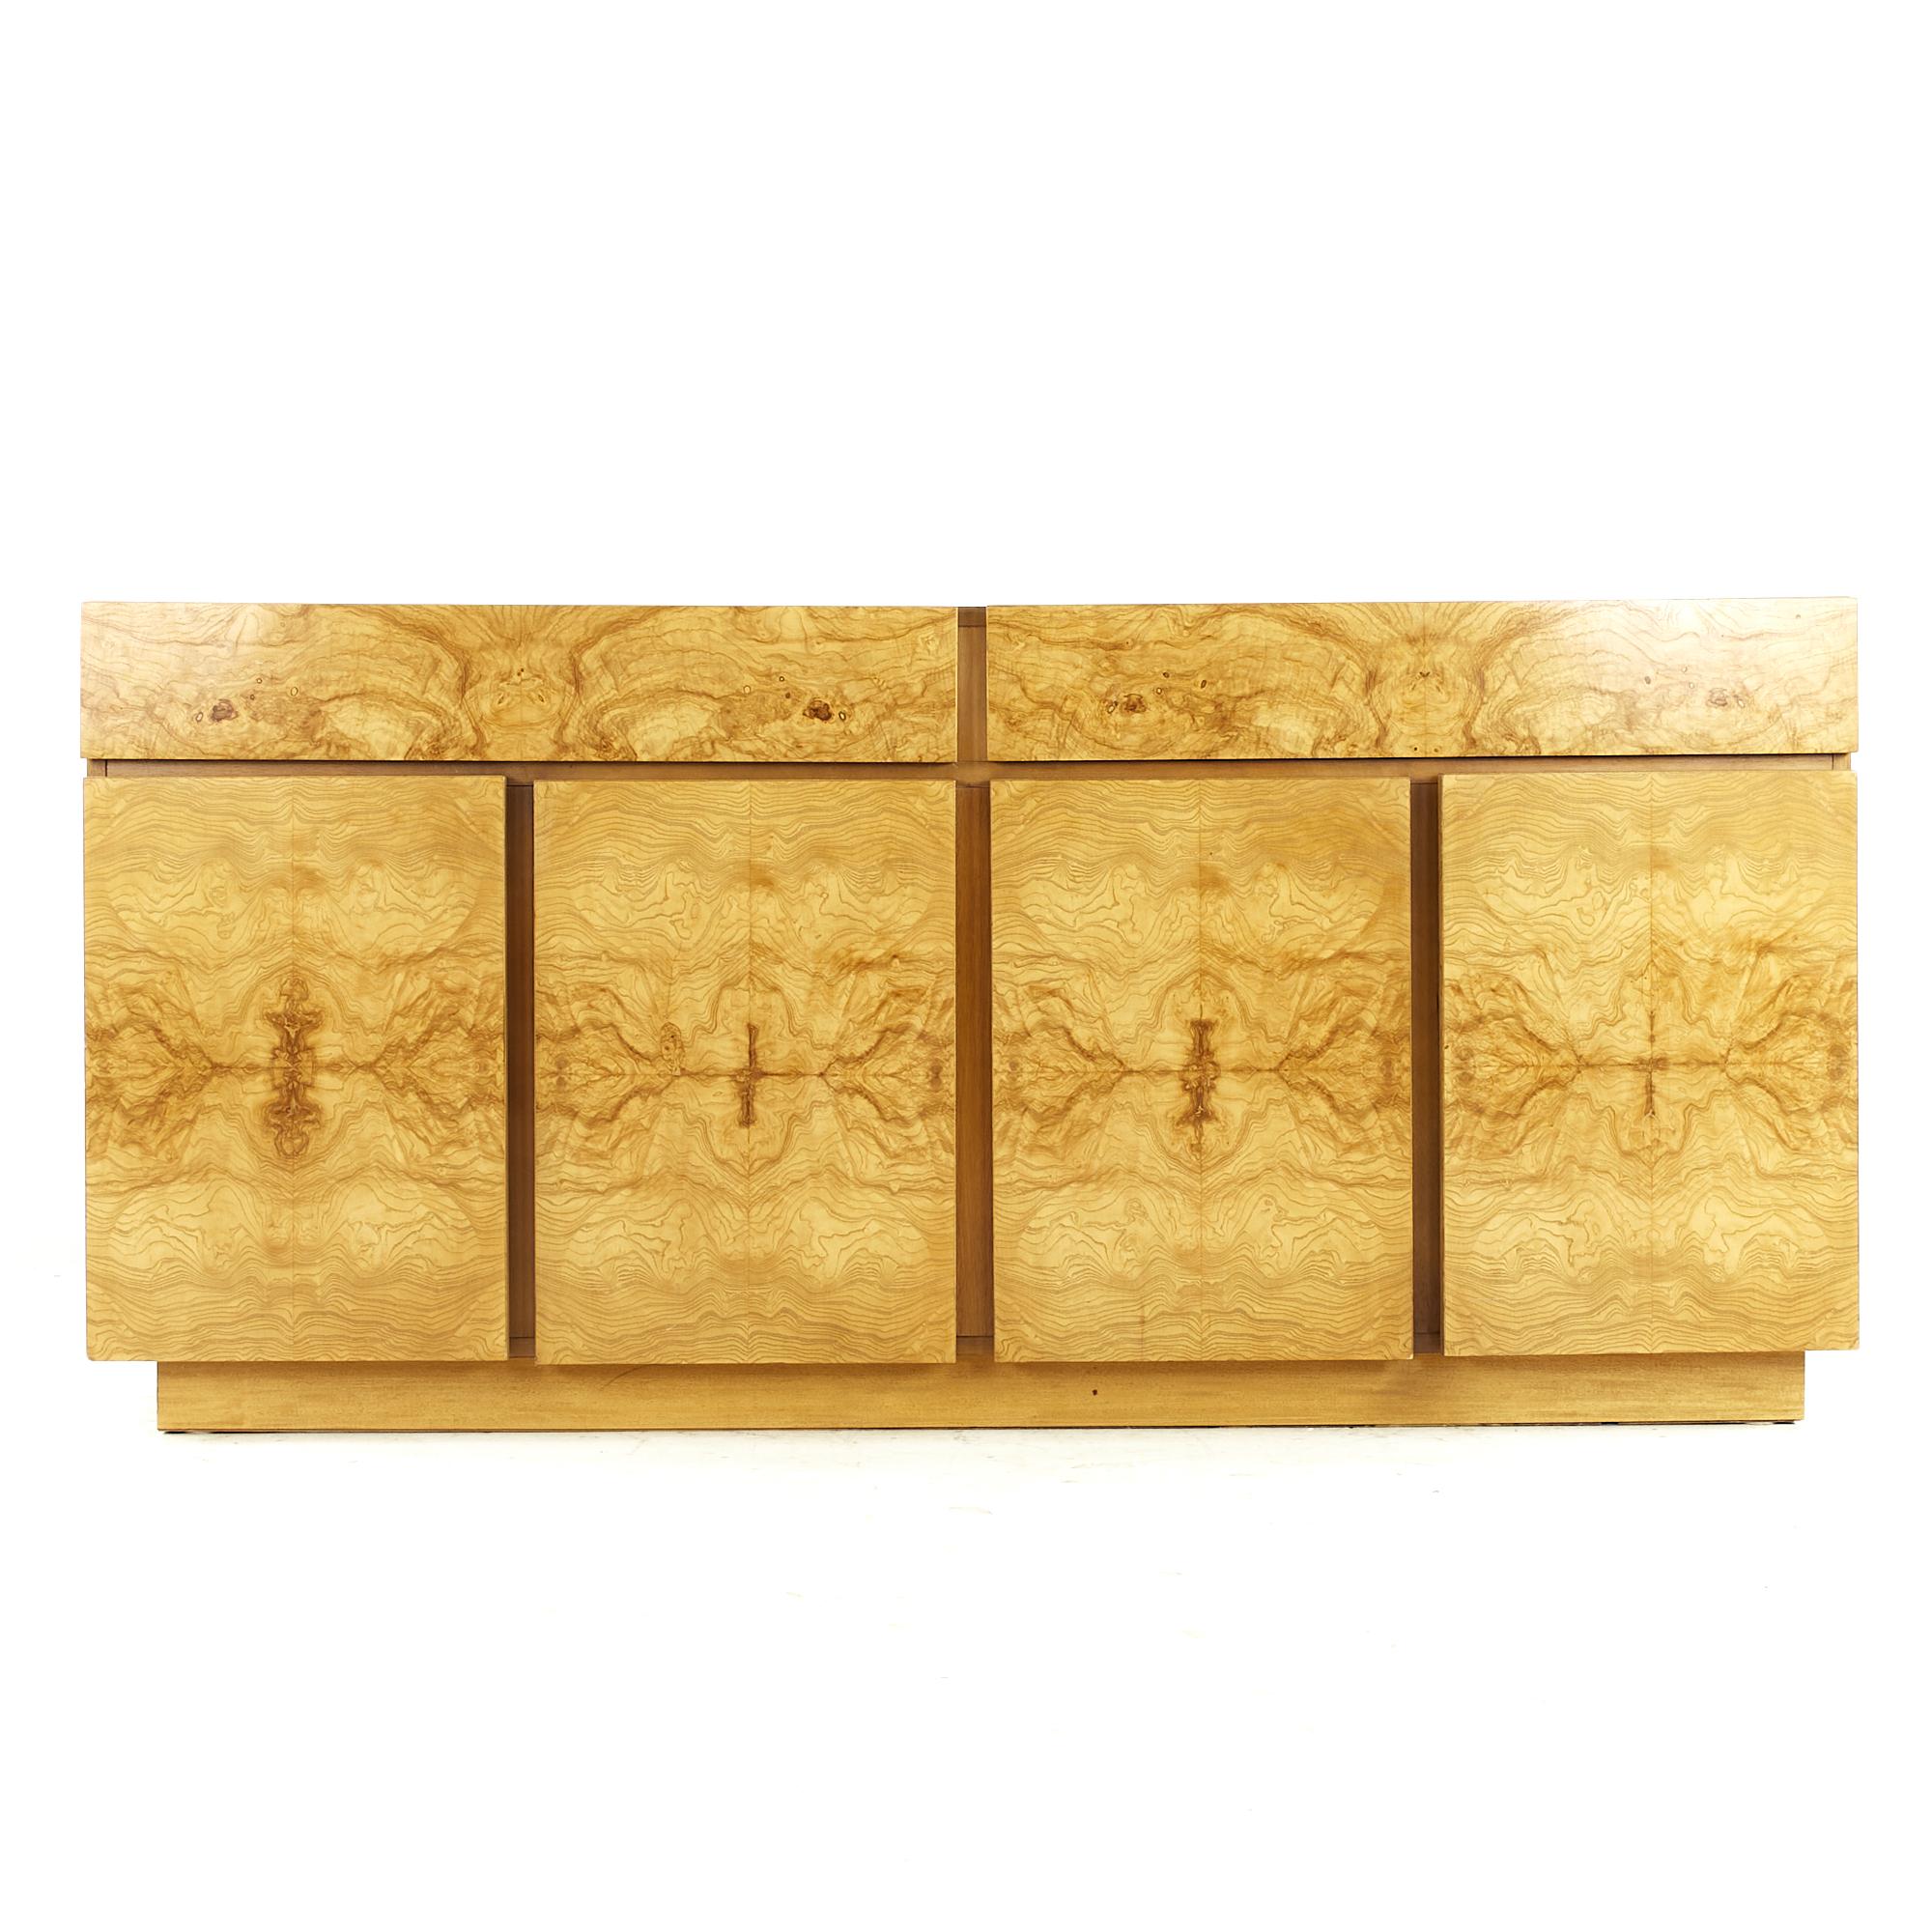 Lane midcentury Burlwood Credenza

This credenza measures: 67.75 wide x 18 deep x 32 inches high

All pieces of furniture can be had in what we call restored vintage condition. That means the piece is restored upon purchase so it’s free of